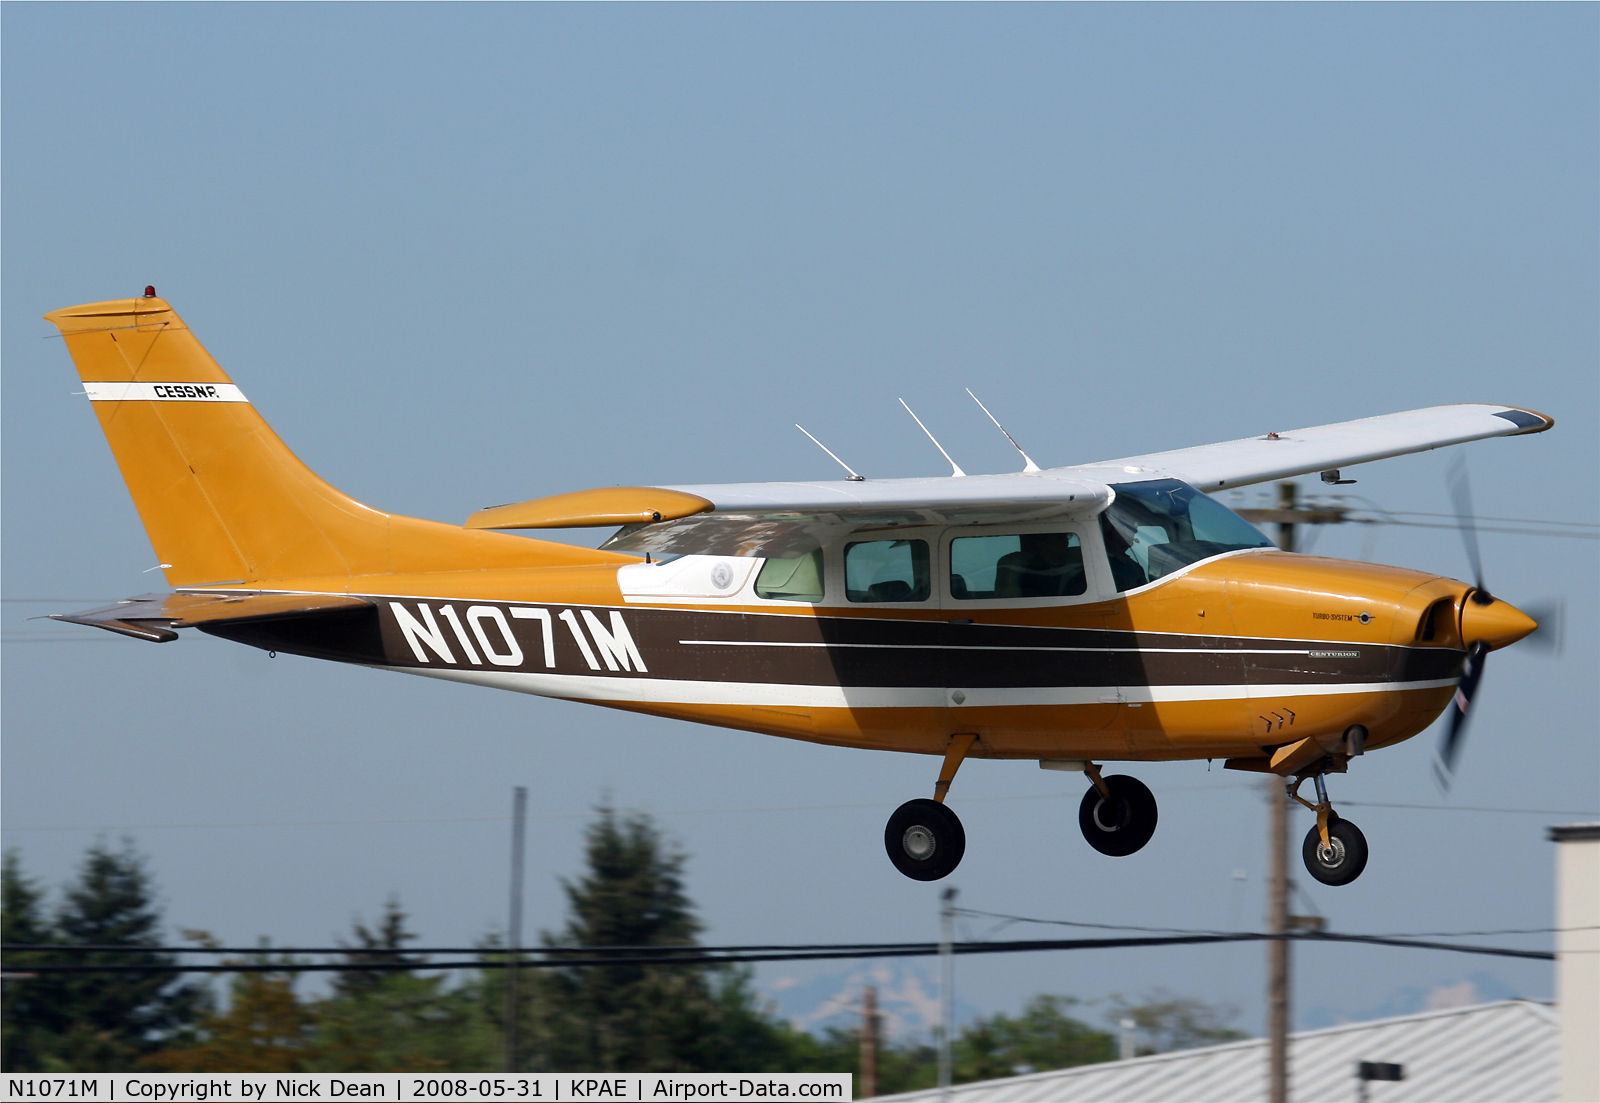 N1071M, 1969 Cessna T210J Turbo Centurion C/N T210-0451, 34R at KPAE great for close action shots in the Summer